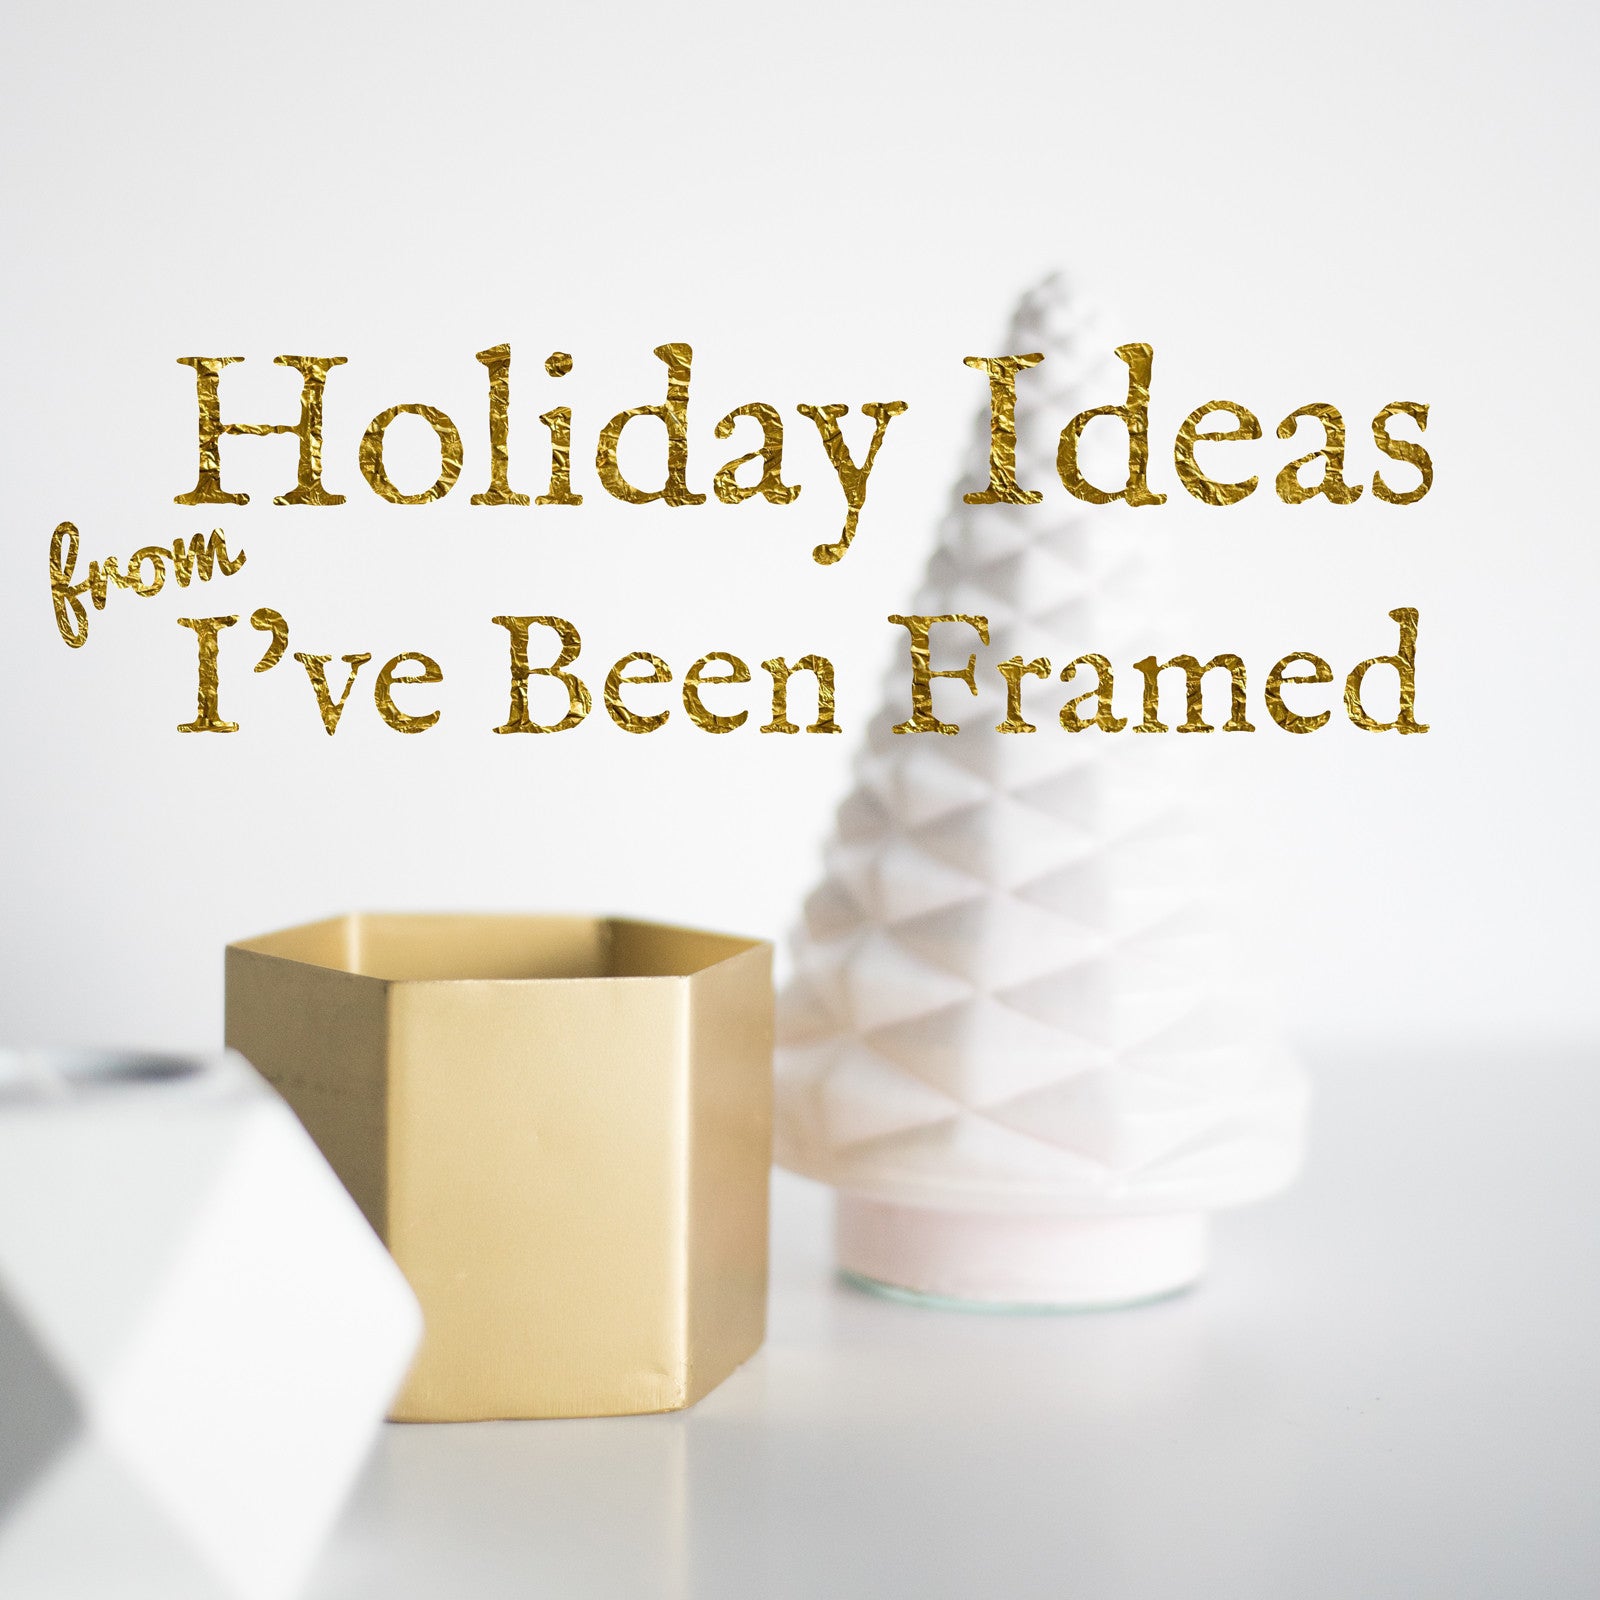 Holiday Ideas from I've Been Framed